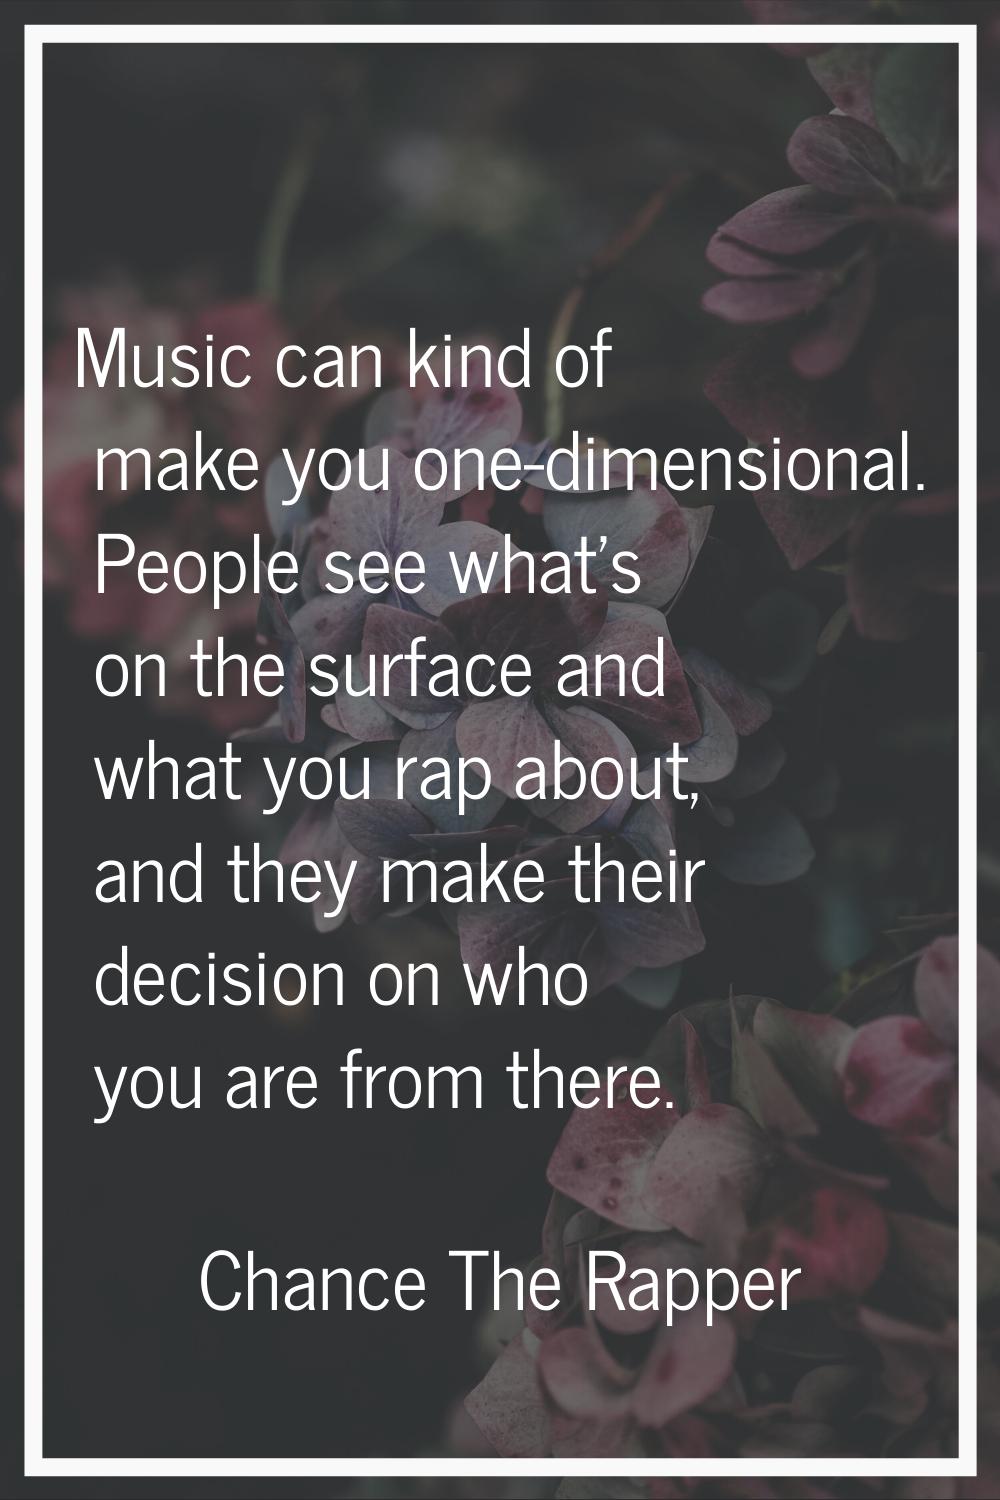 Music can kind of make you one-dimensional. People see what's on the surface and what you rap about